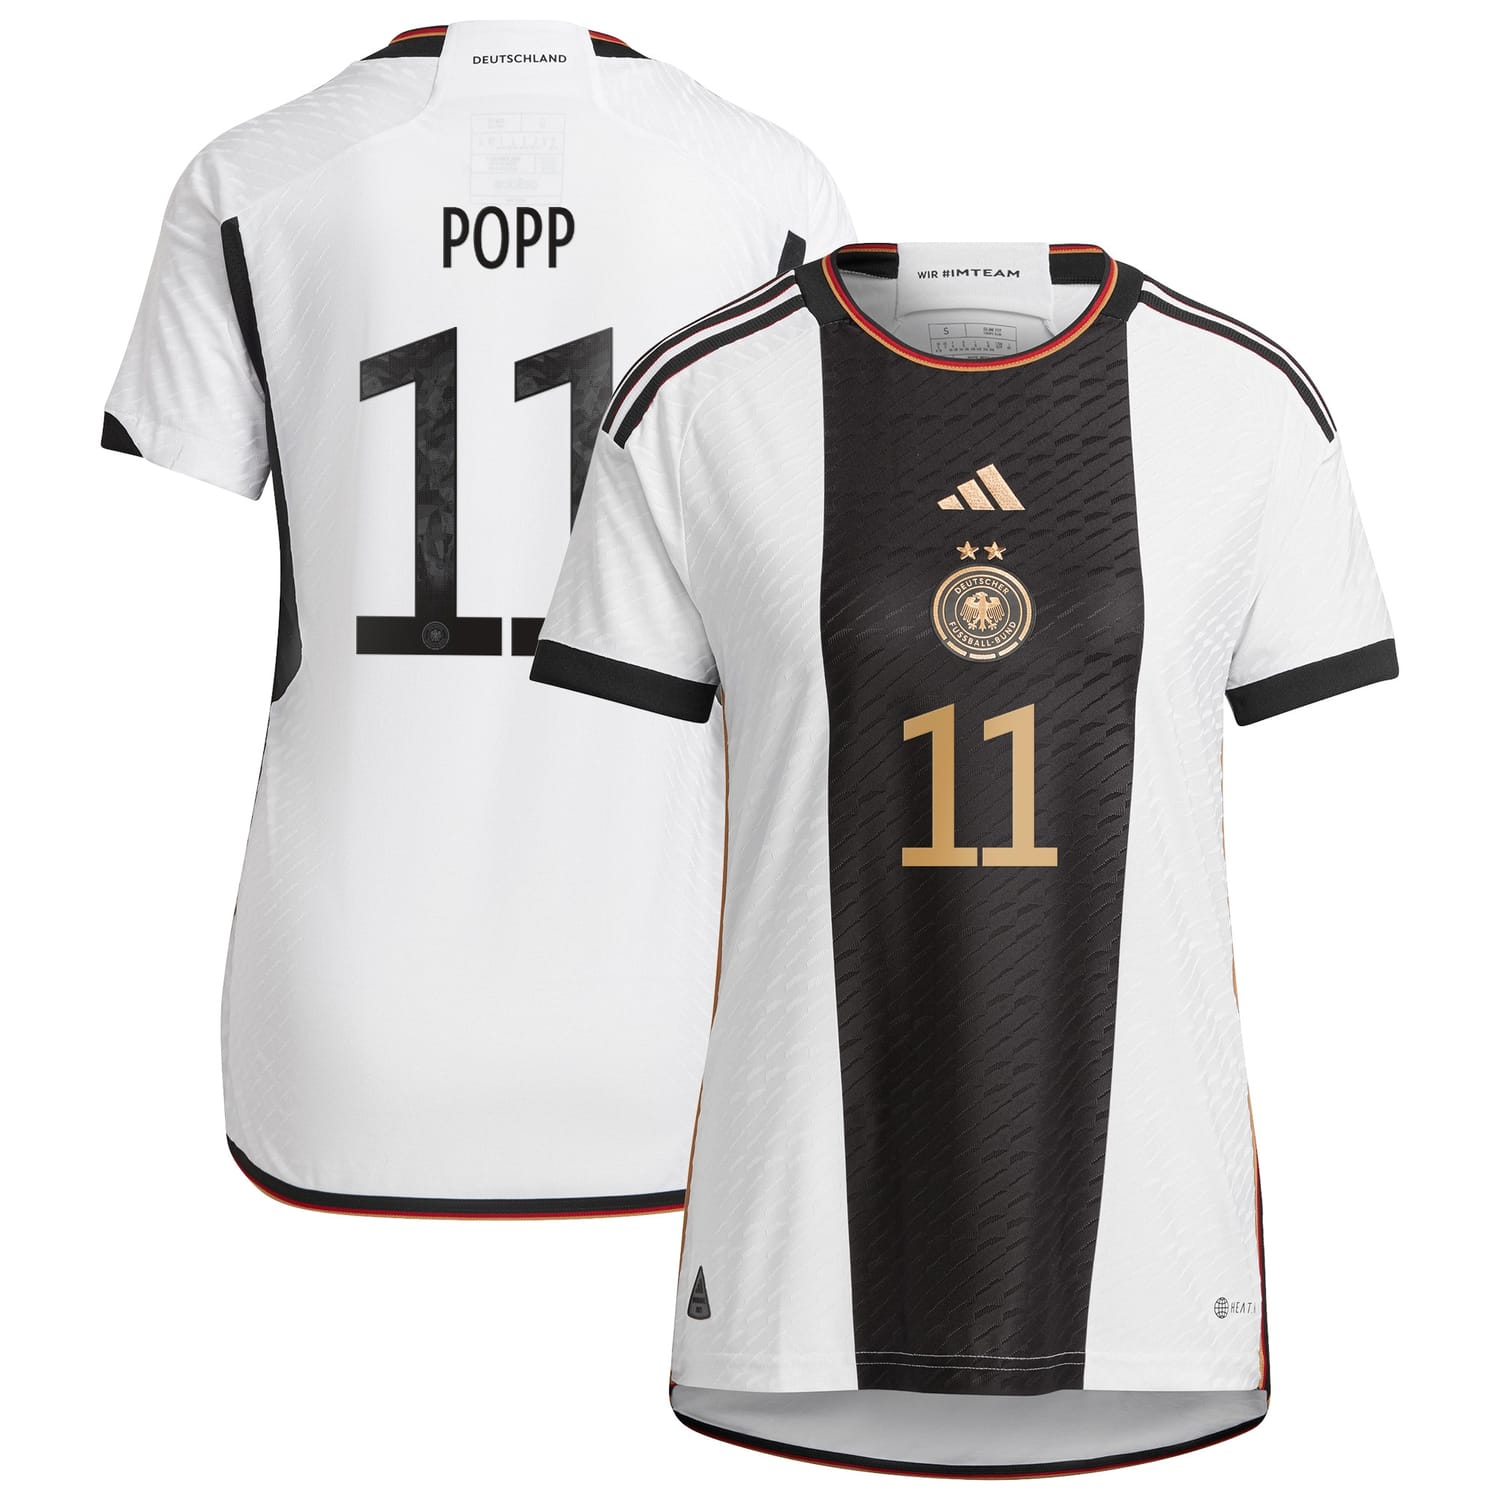 Germany National Team Home Authentic Jersey Shirt player Alexandra Popp 11 printing for Women